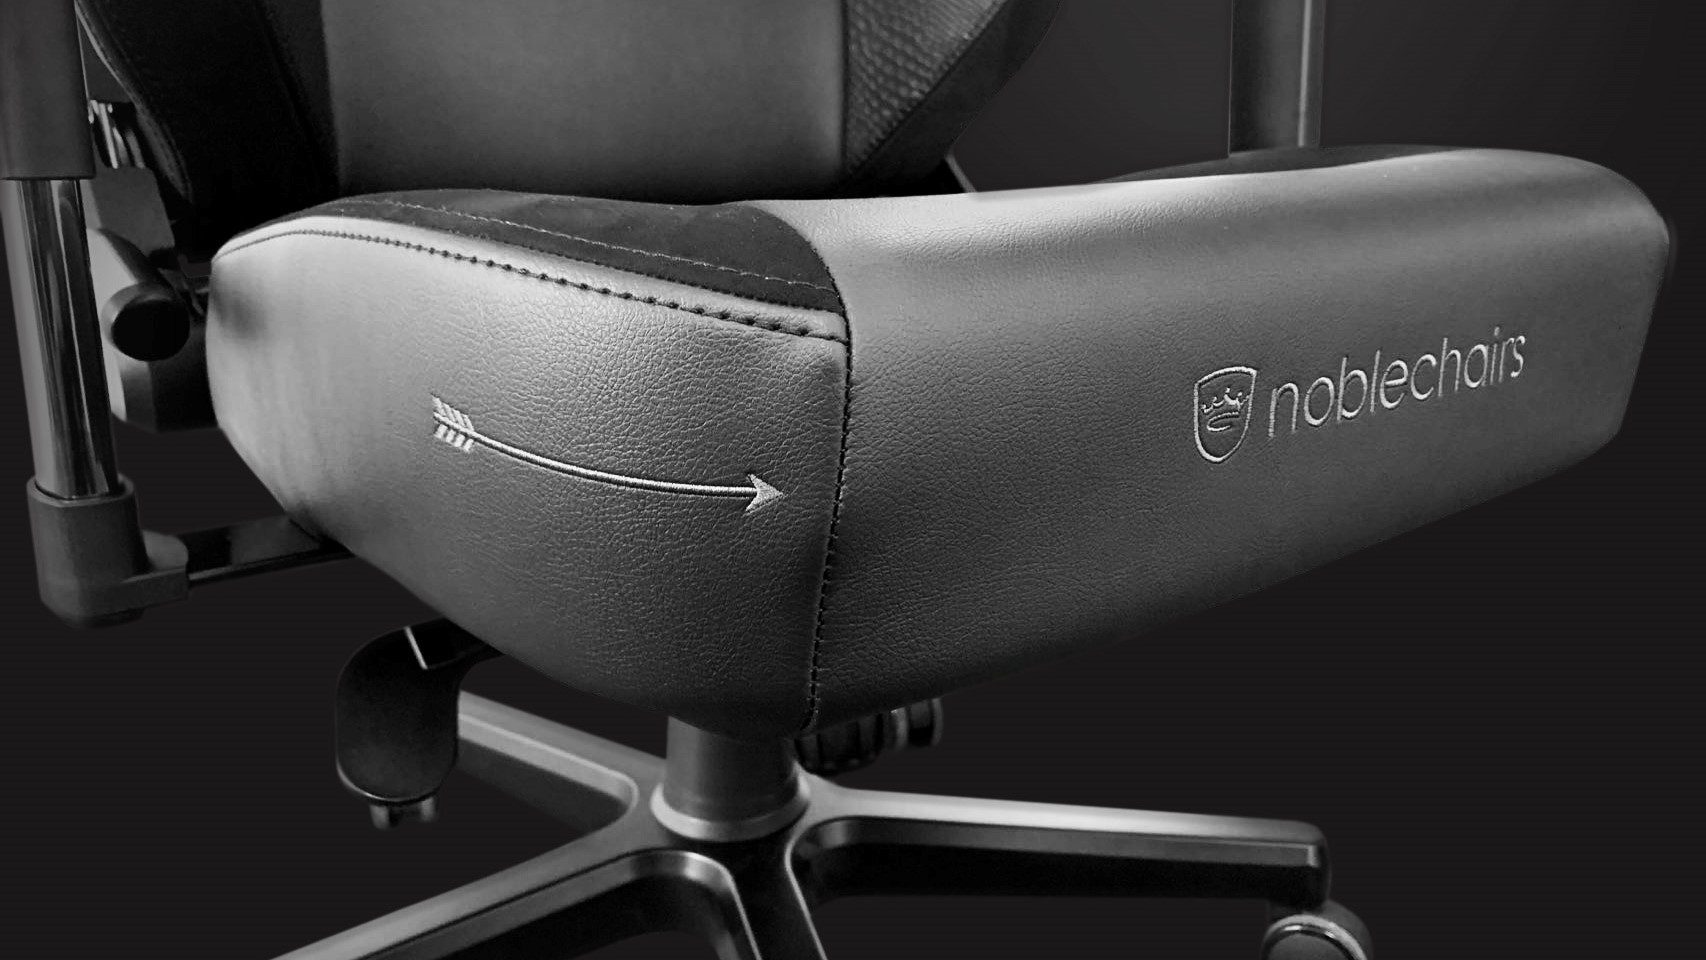 Noblechairs' Skyrim 10th anniversary gaming chair is a subtle Nordic nod